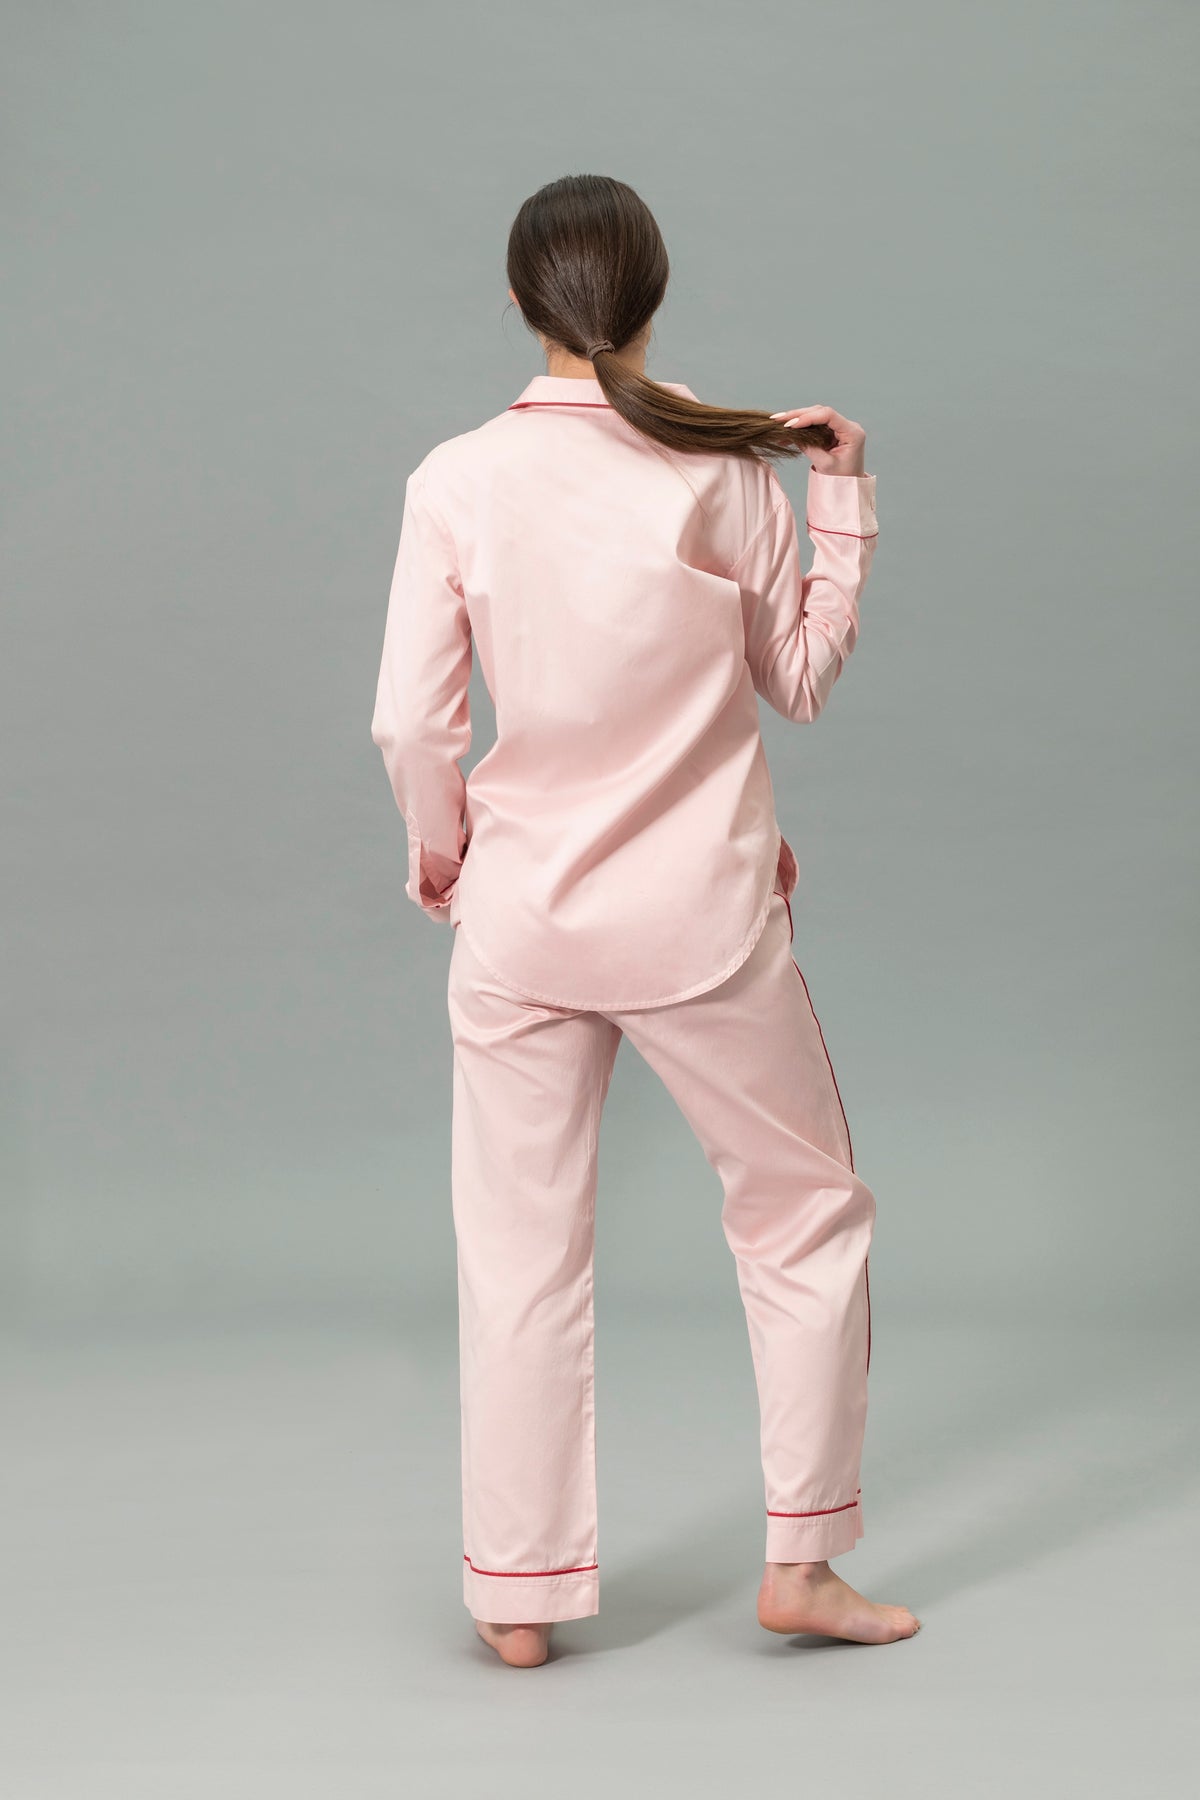 Back View of Model Wearing Matouk Nocturne Pajama Set in Color Pink and Scarlet